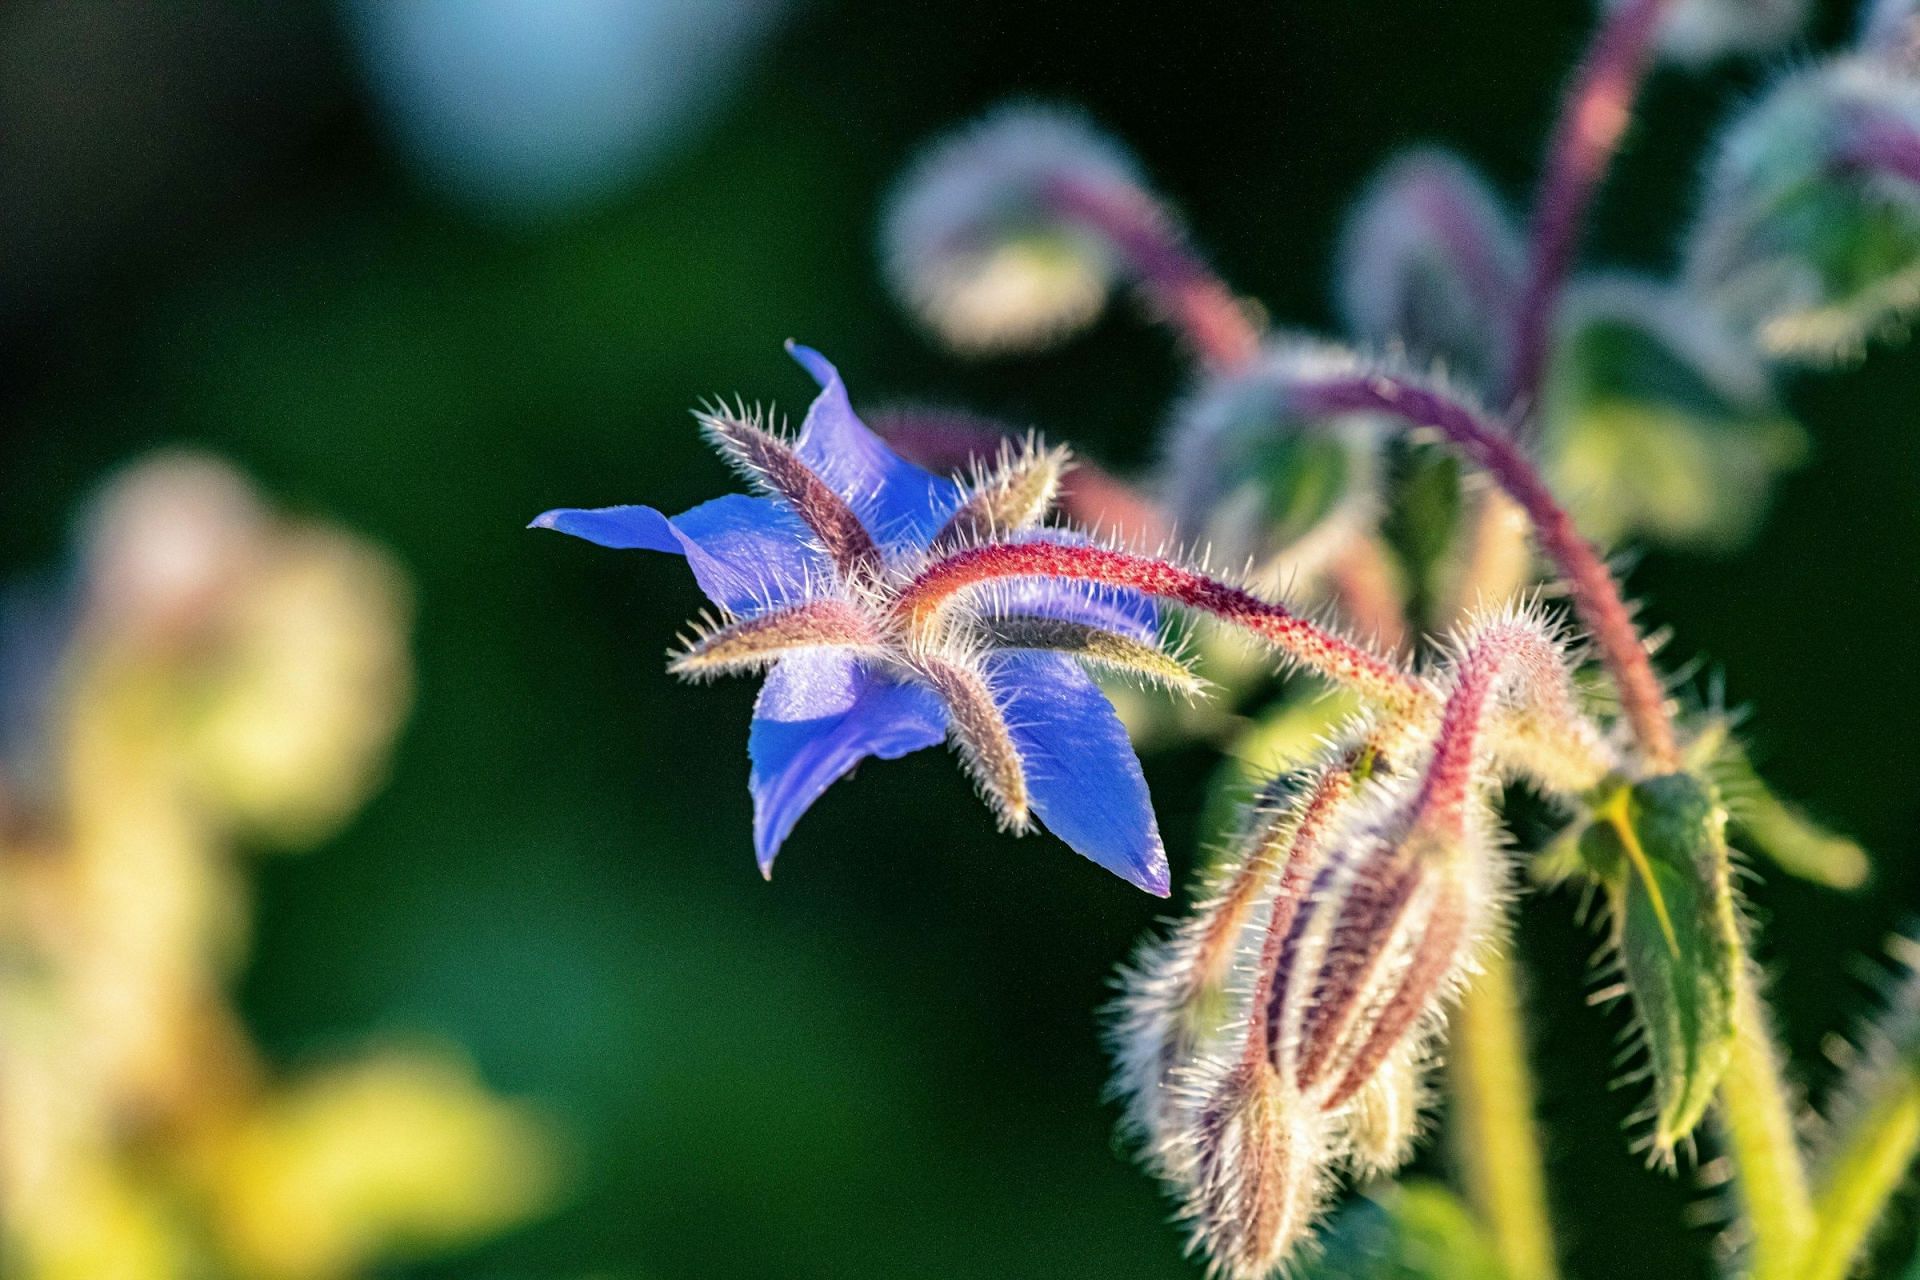 Borage oil is extracted from this plant (Image by Gary J Stearman/Unsplash)